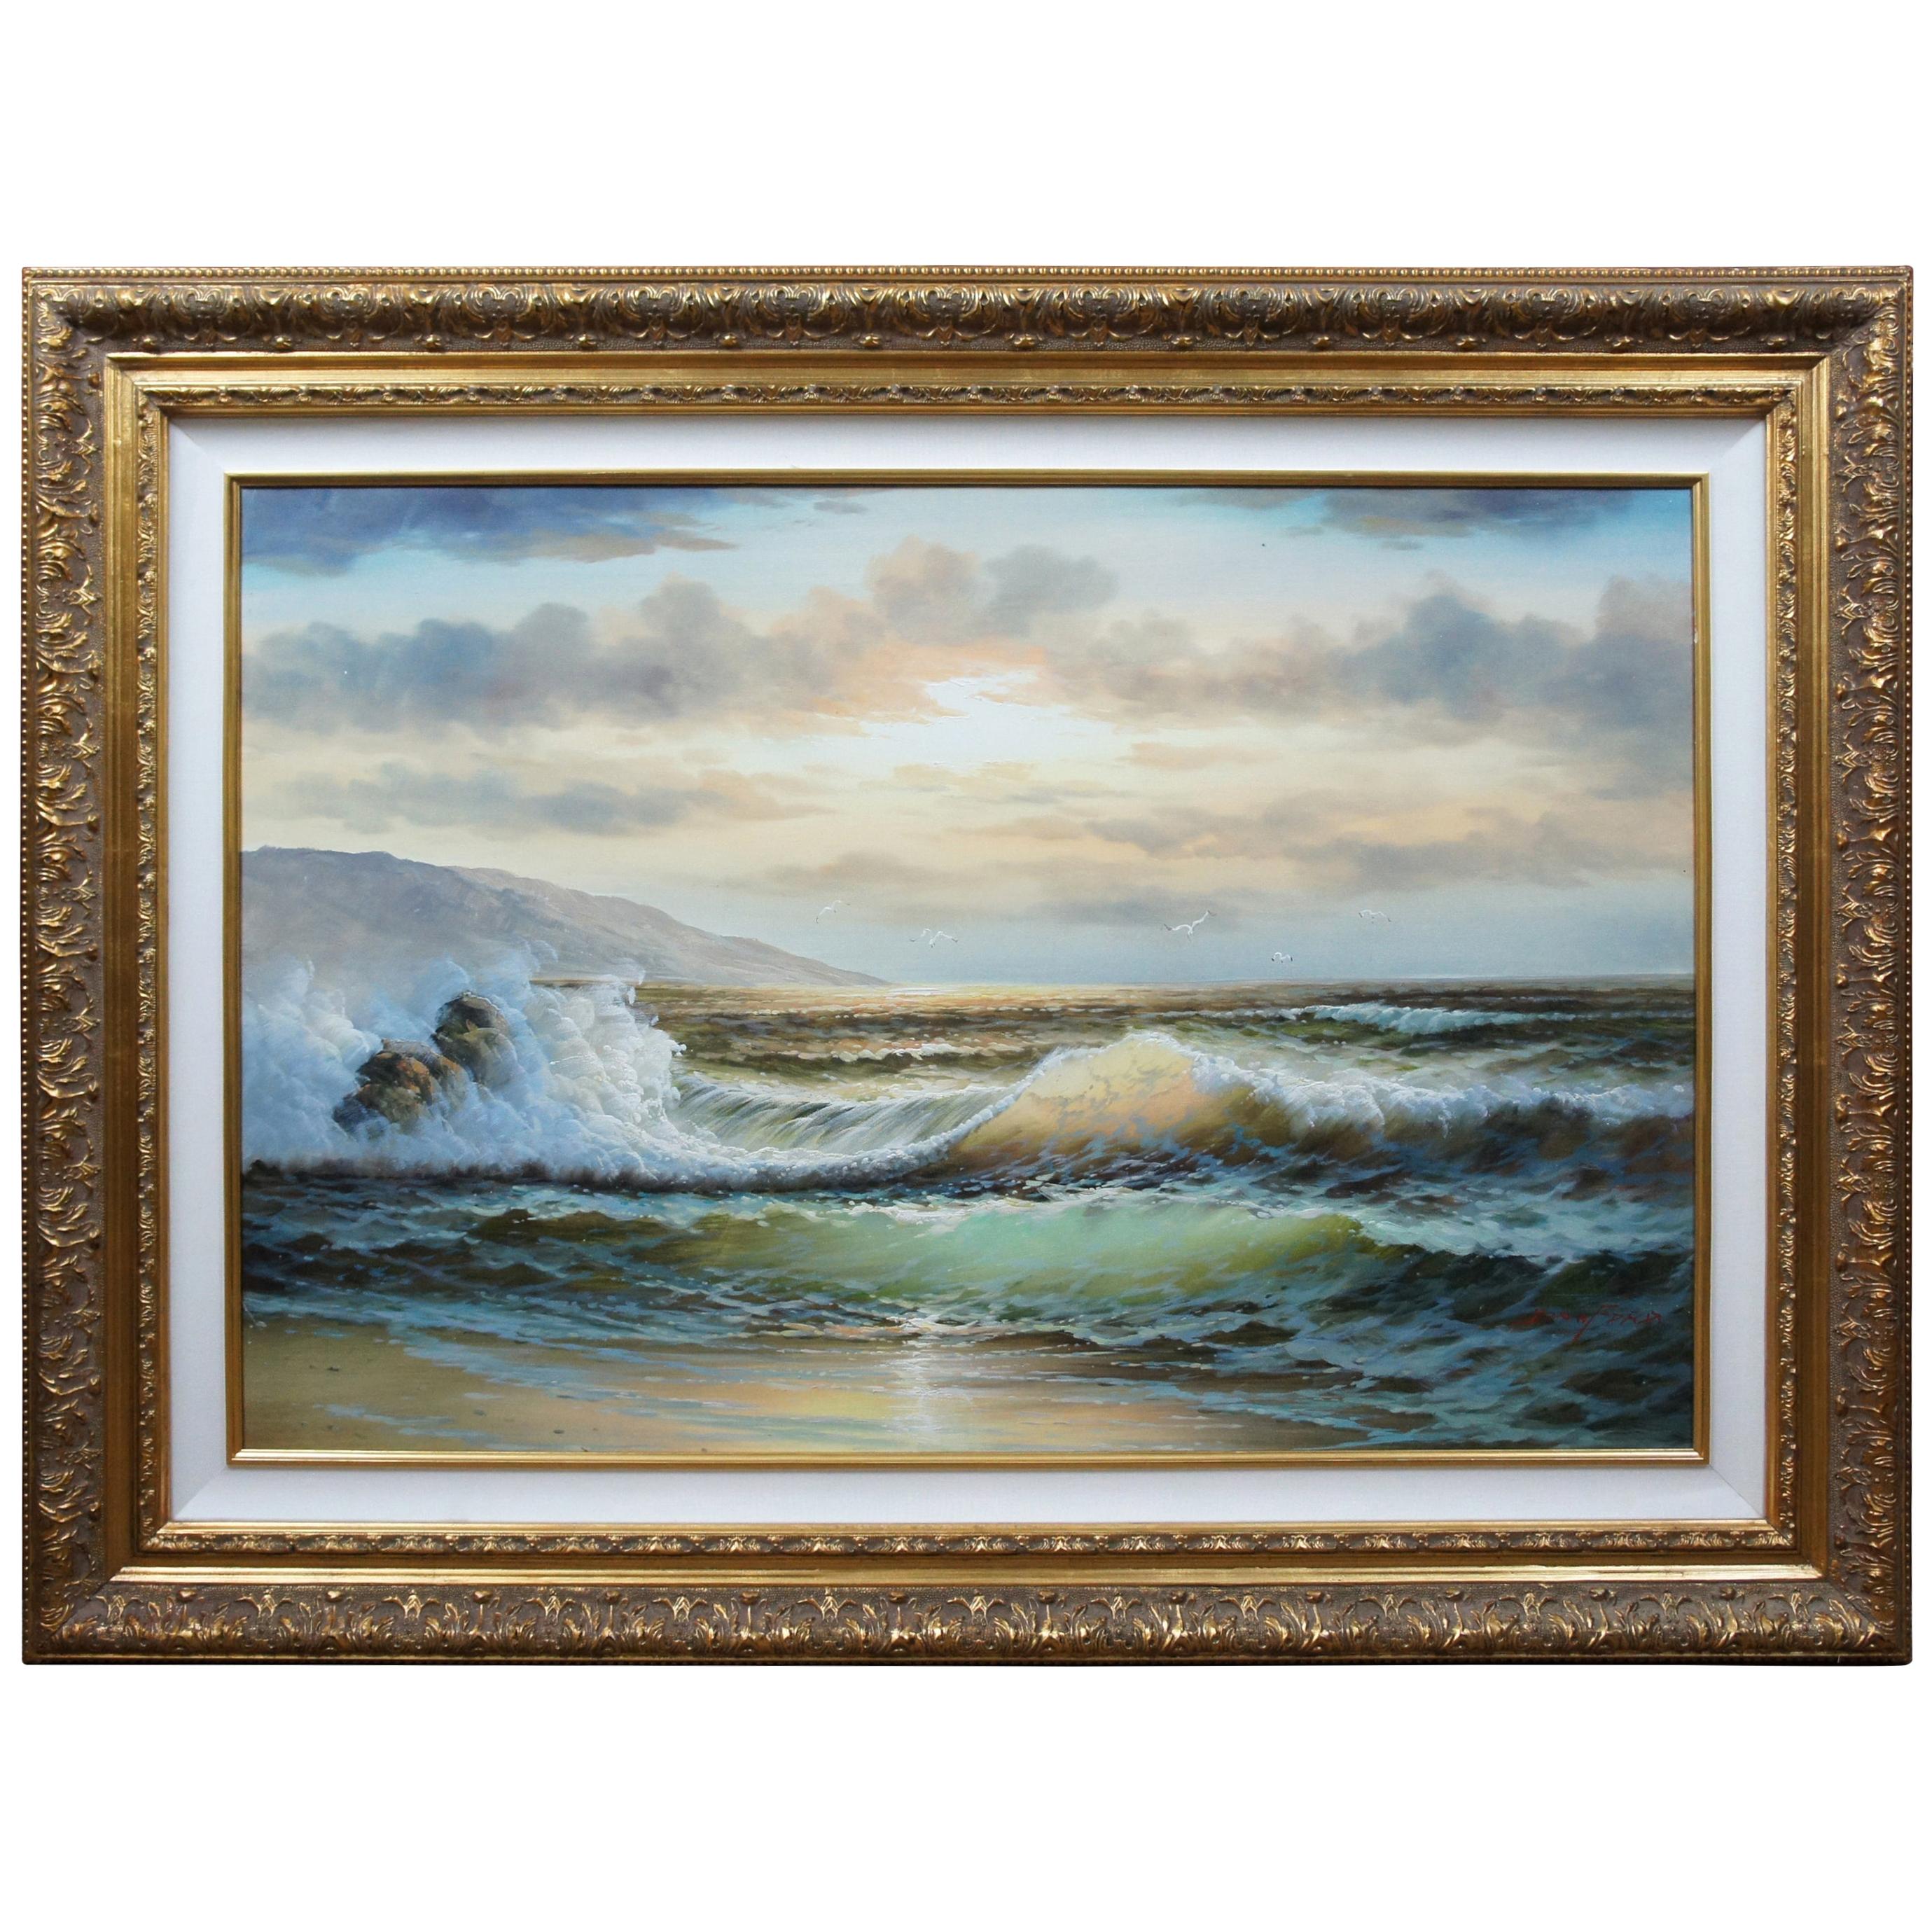 Dan Ford Ocean Waves Seascape Painting Realism Canvas Framed